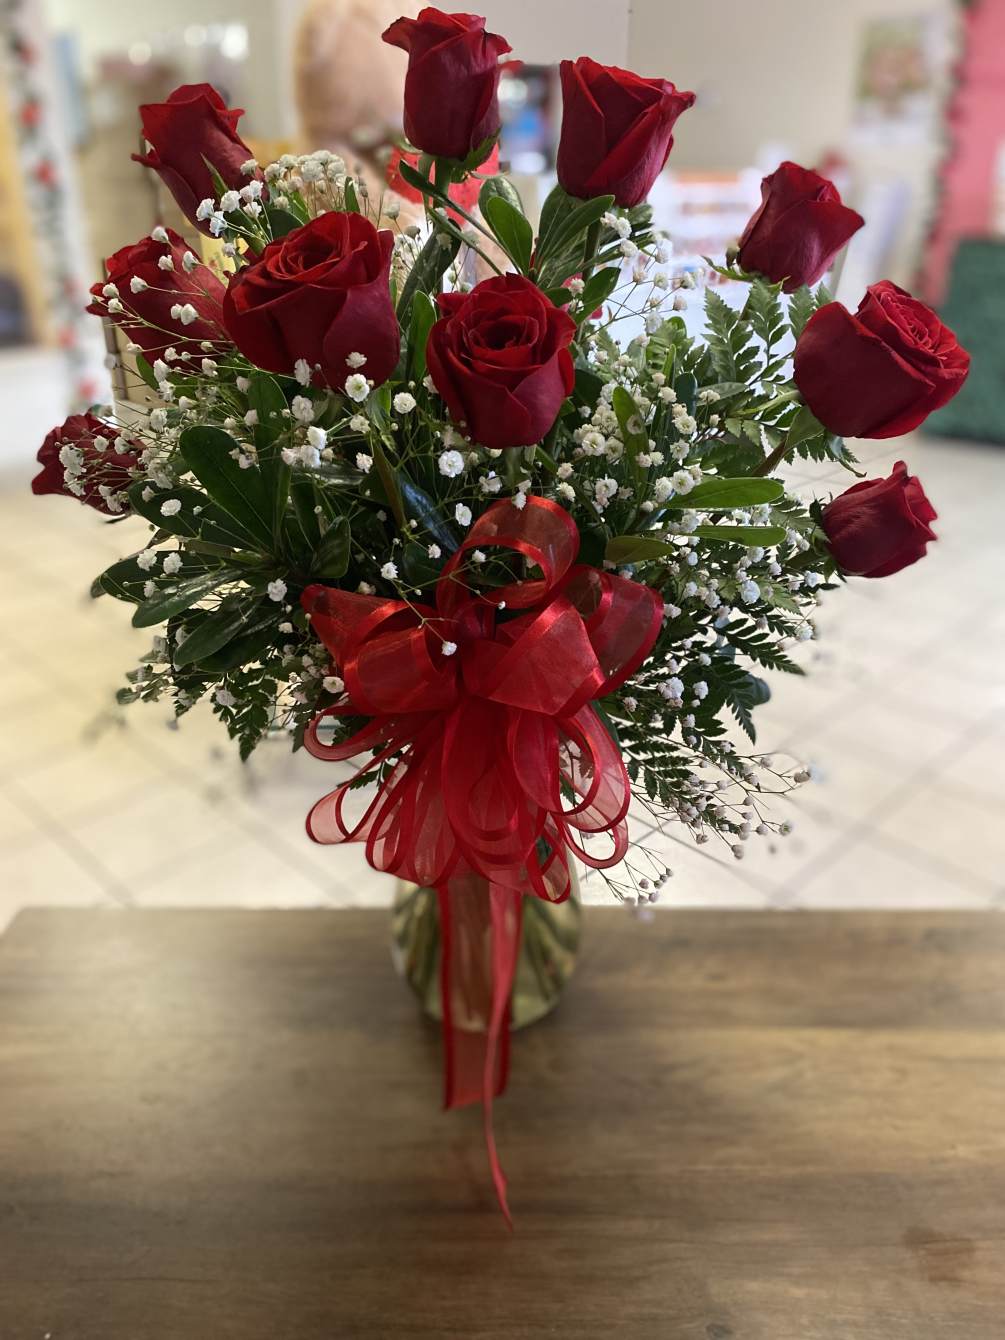 Twelve beautiful red roses arranged in a vase with baby&rsquo;s breath. Topped